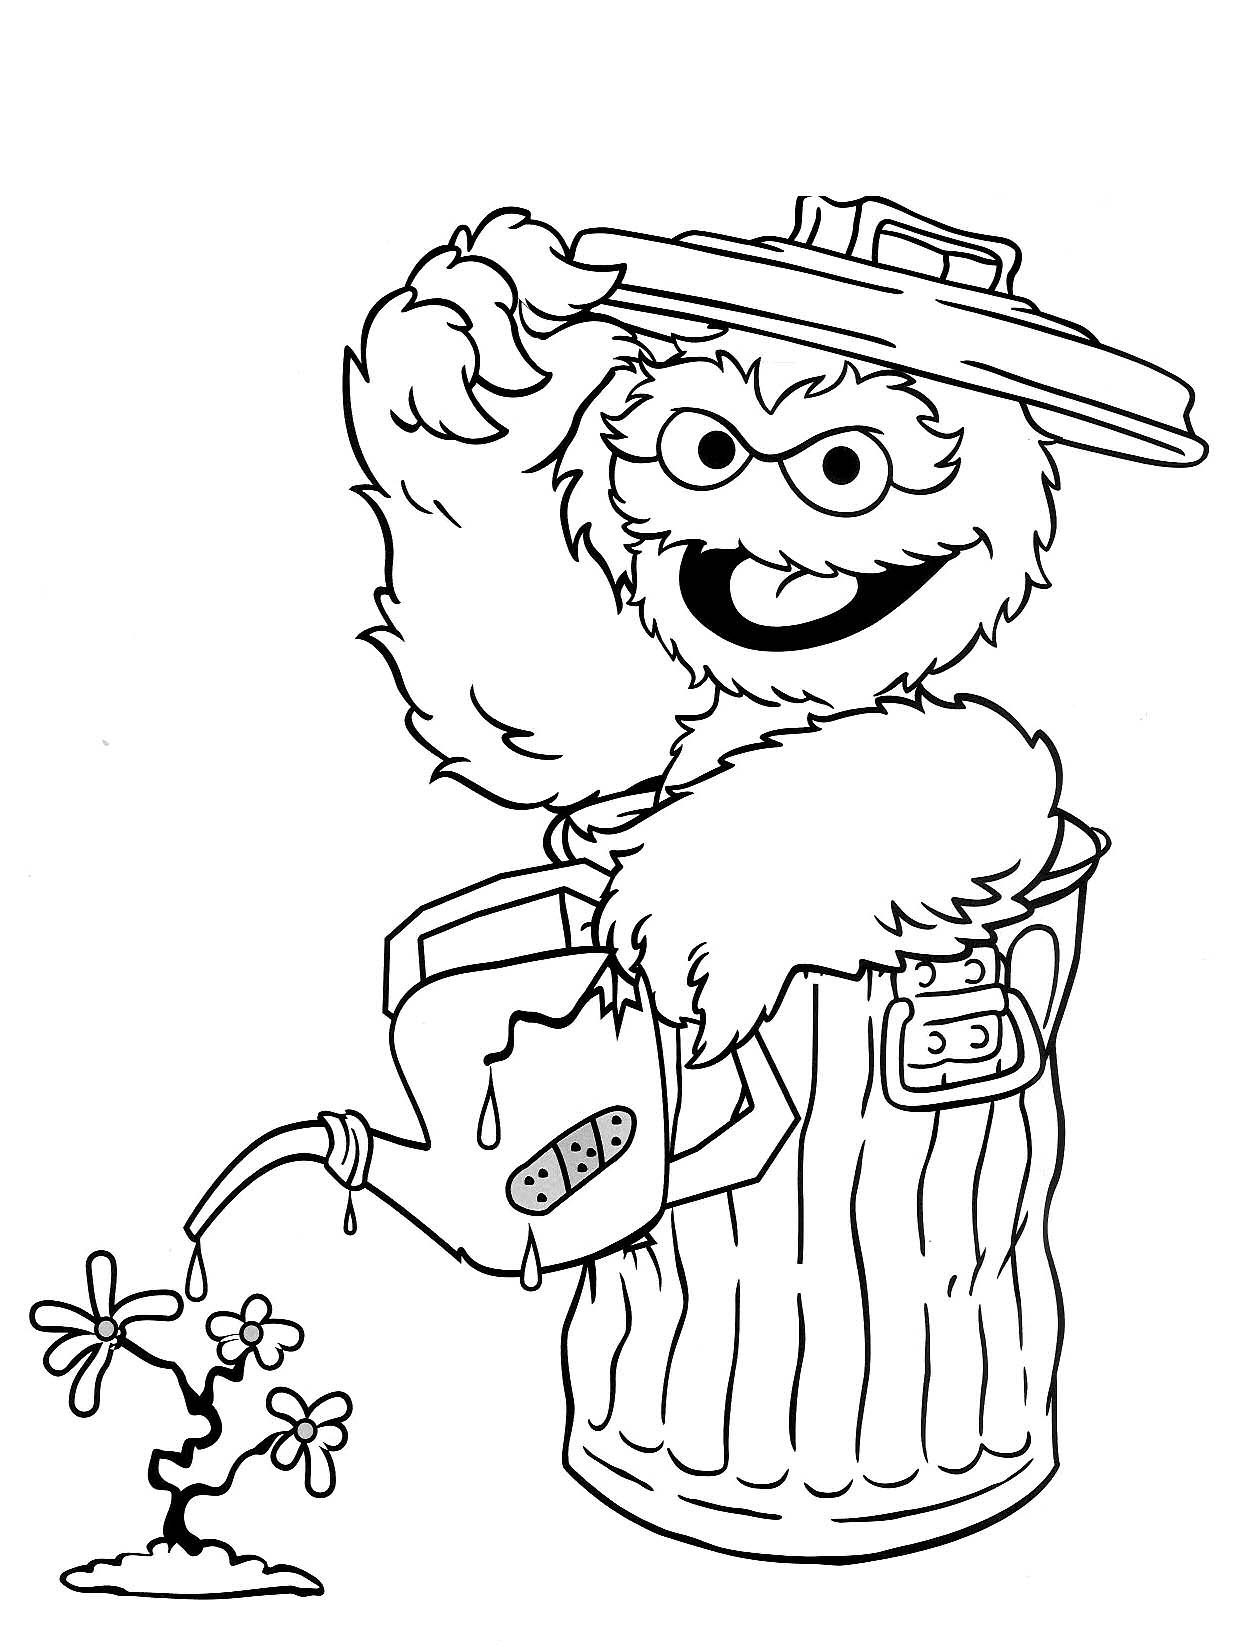 Oscar Watering Plant Coloring Page